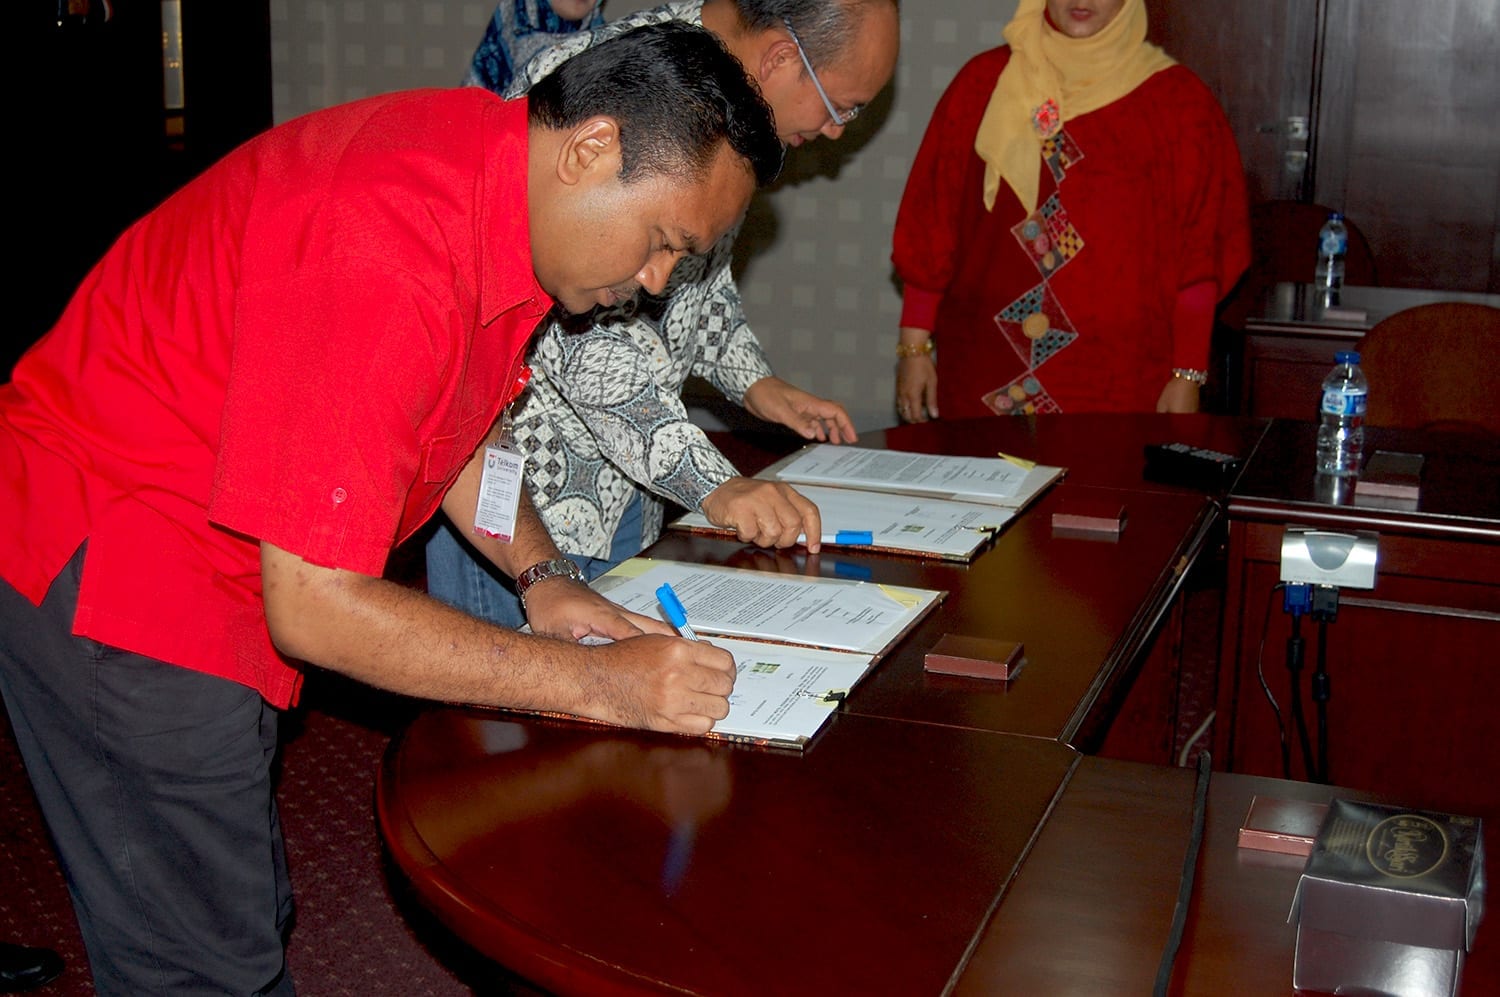 Gallery Signing of Partnership Agreement between the School of Computing and Telkom Inc. in the Research Division of the Digital Service